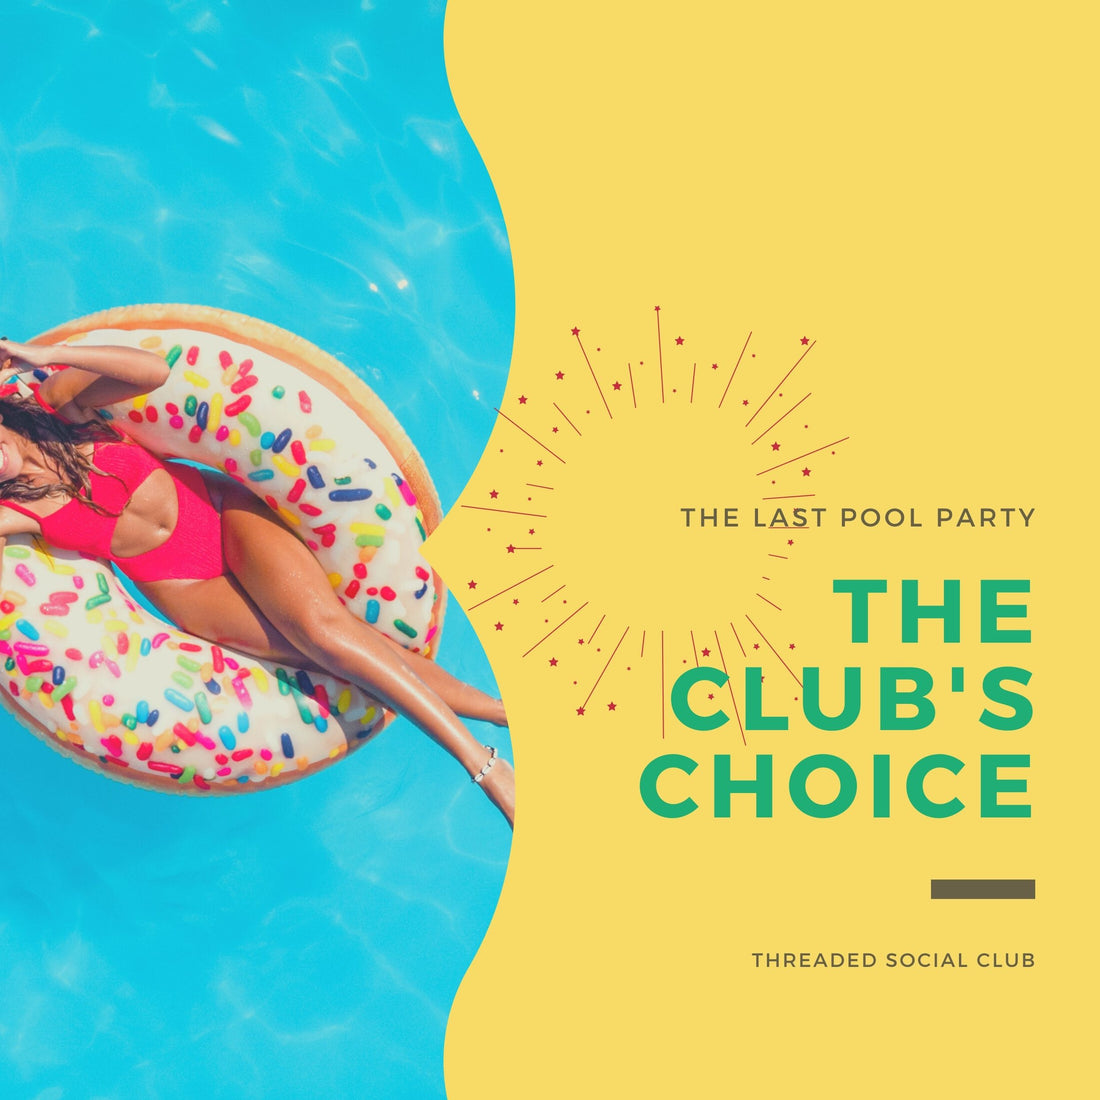 The Club's Choice: The Final Poolside Party